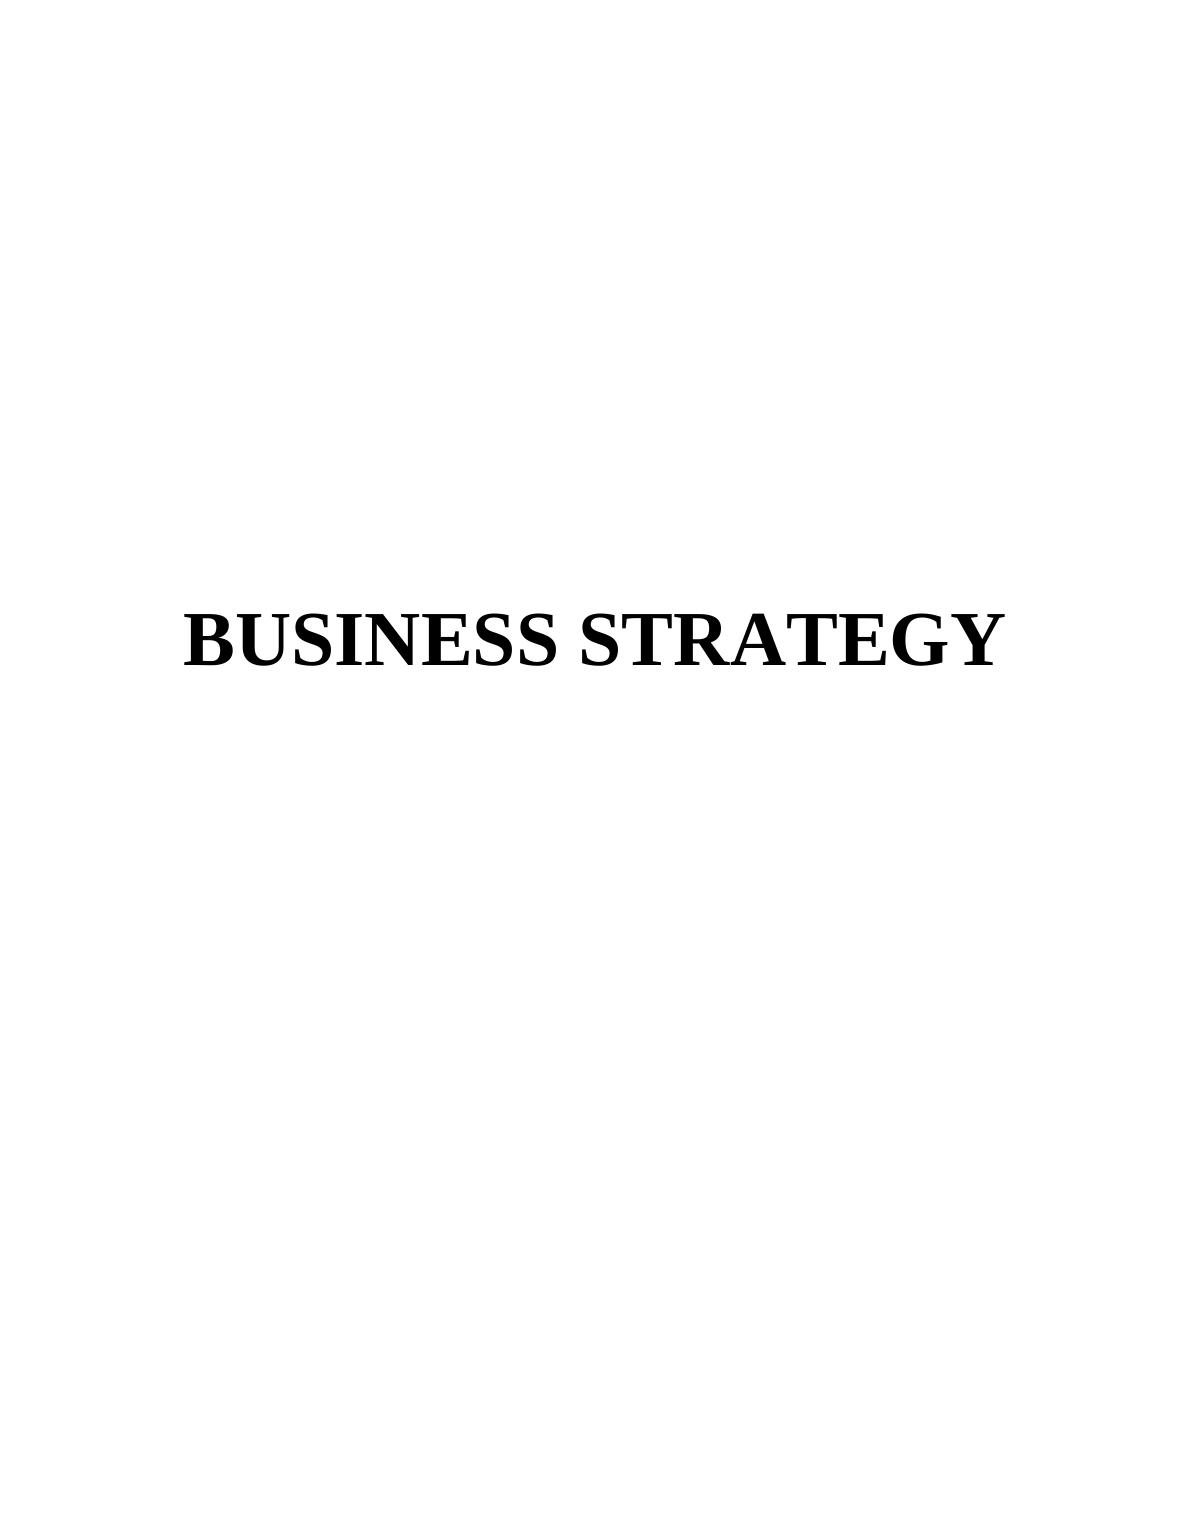 Business Strategy of Aldi organisation : Assignment_1